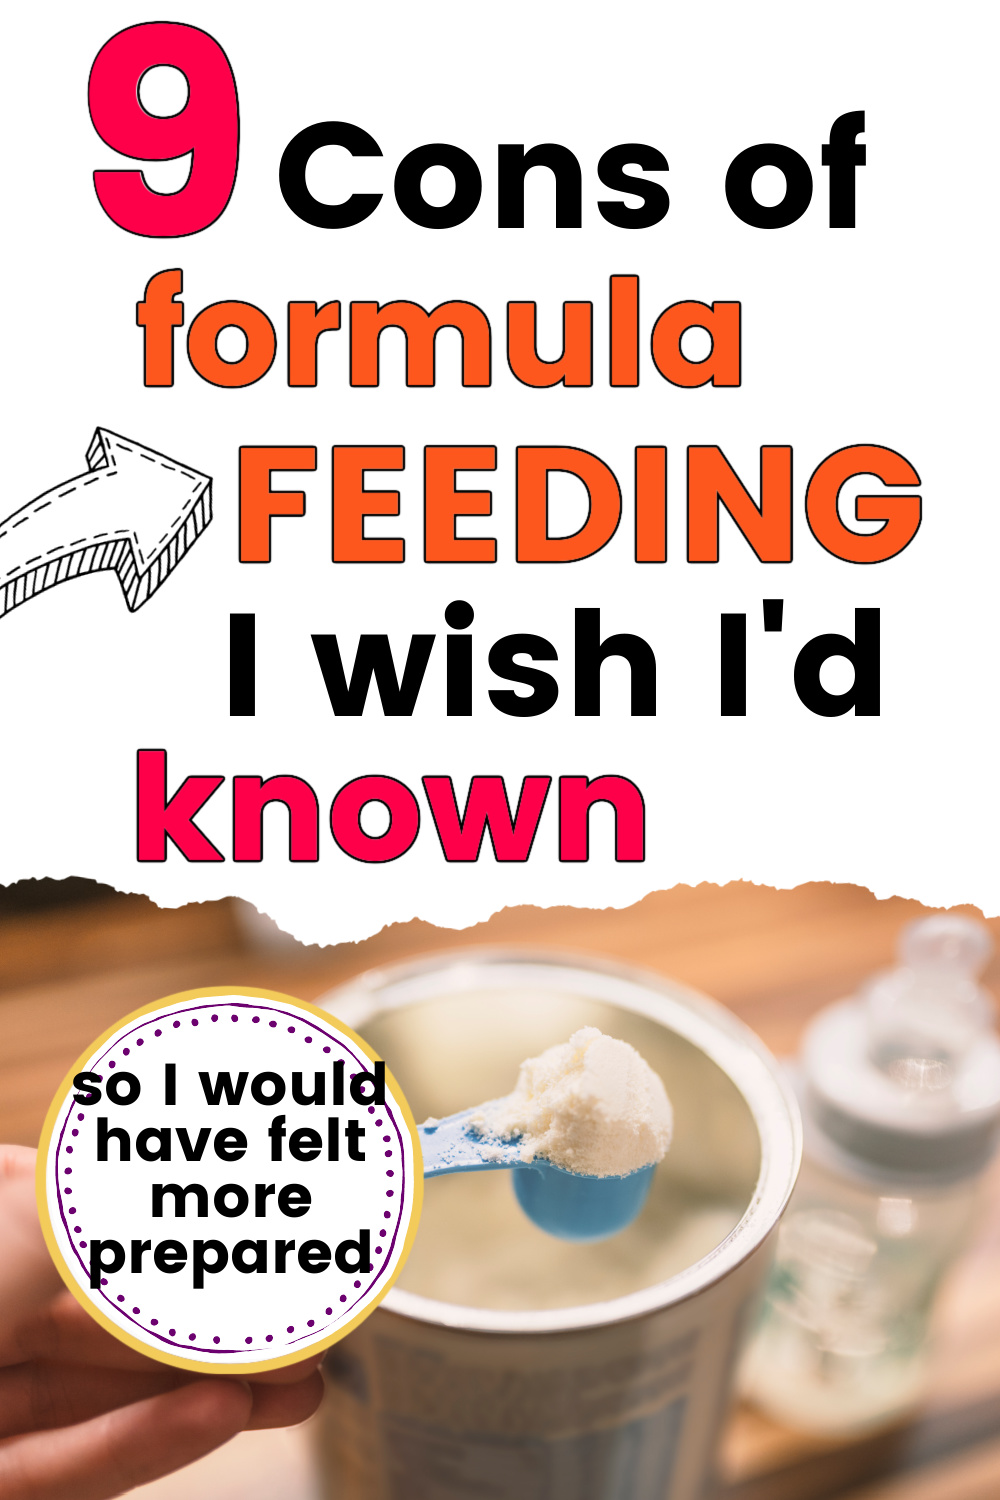 scoop full of formula with text overlay, "9 cons of formula feeding I wish I'd known".